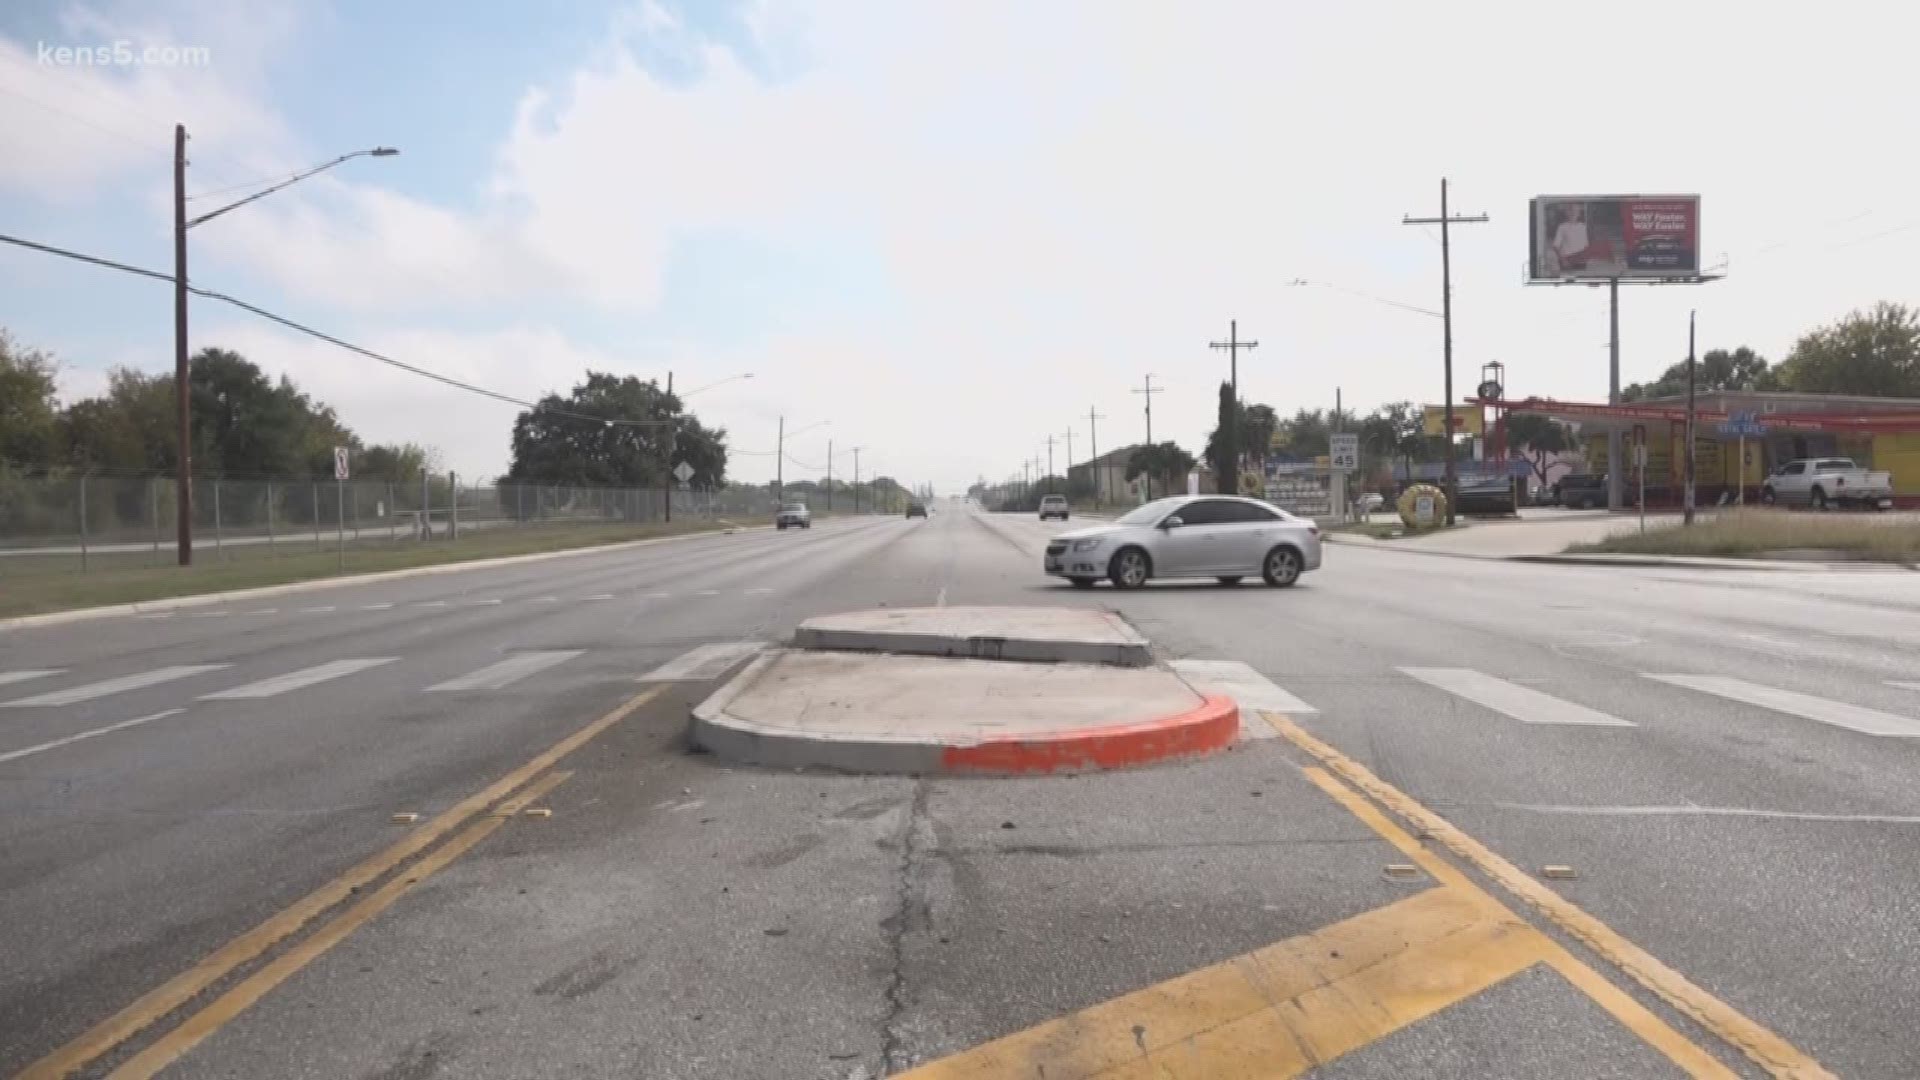 Meant to provide bus riders with an easy way of getting to their stop, people are saying the crosswalk instead is difficult, even hazardous, to distinguish.